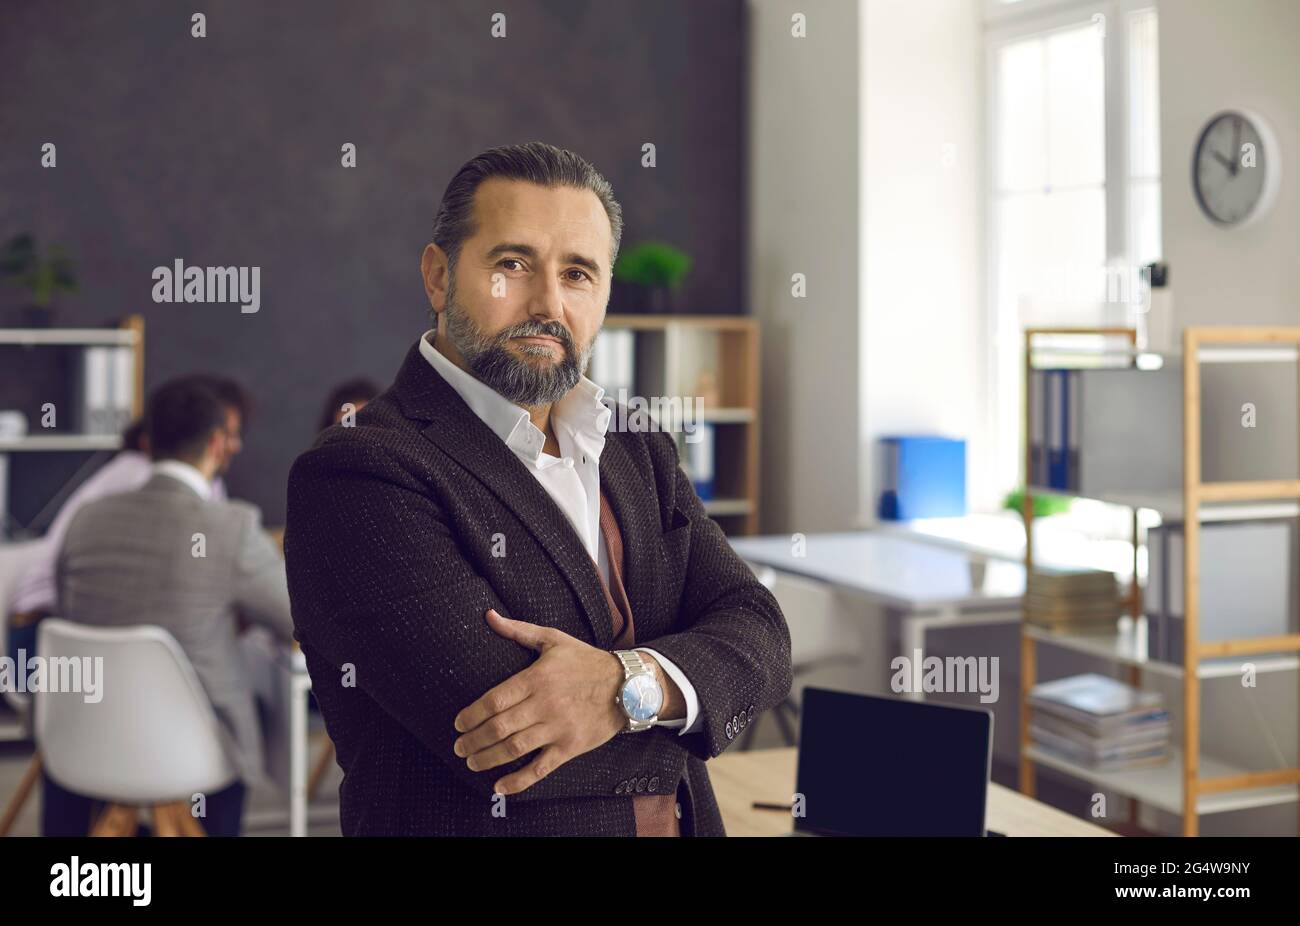 Proud and successful serious mature caucasian team leader portrait in office Stock Photo